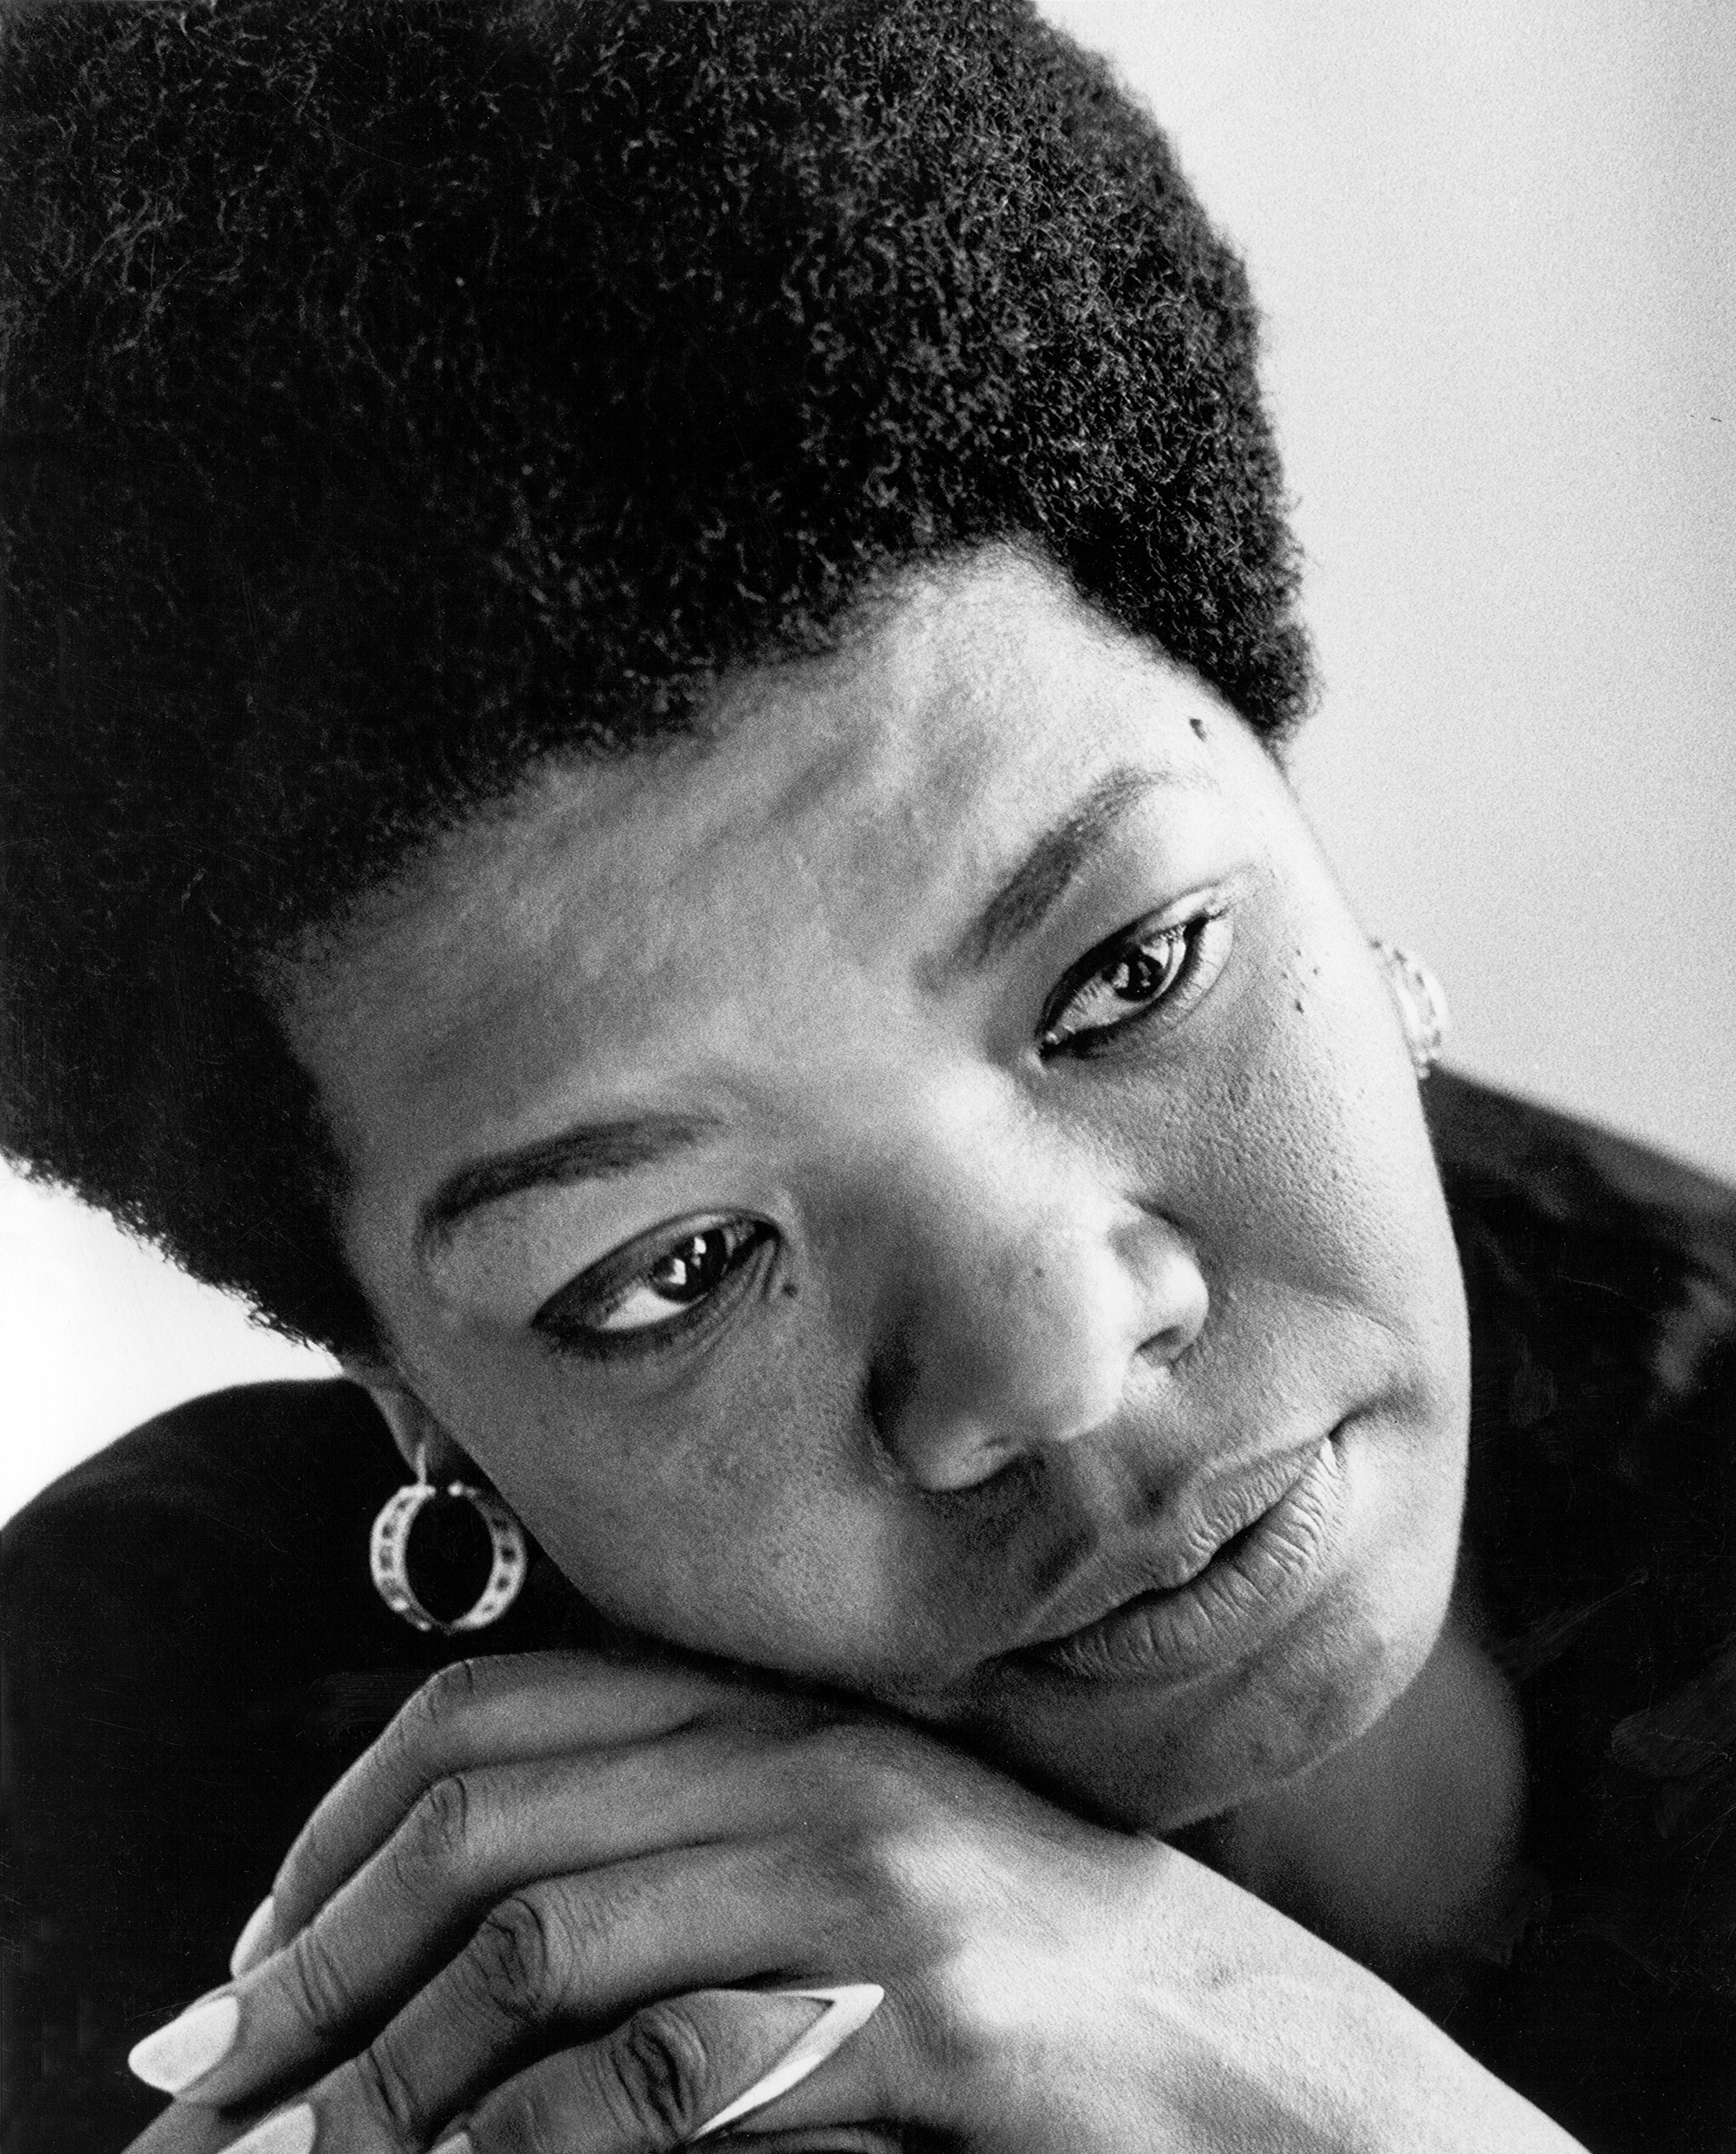 Maya Angelou was born Marguerite Johnson in 1928 in St. Louis, Missouri. It wasn’t until 1970, when she was 41, that she became an author.